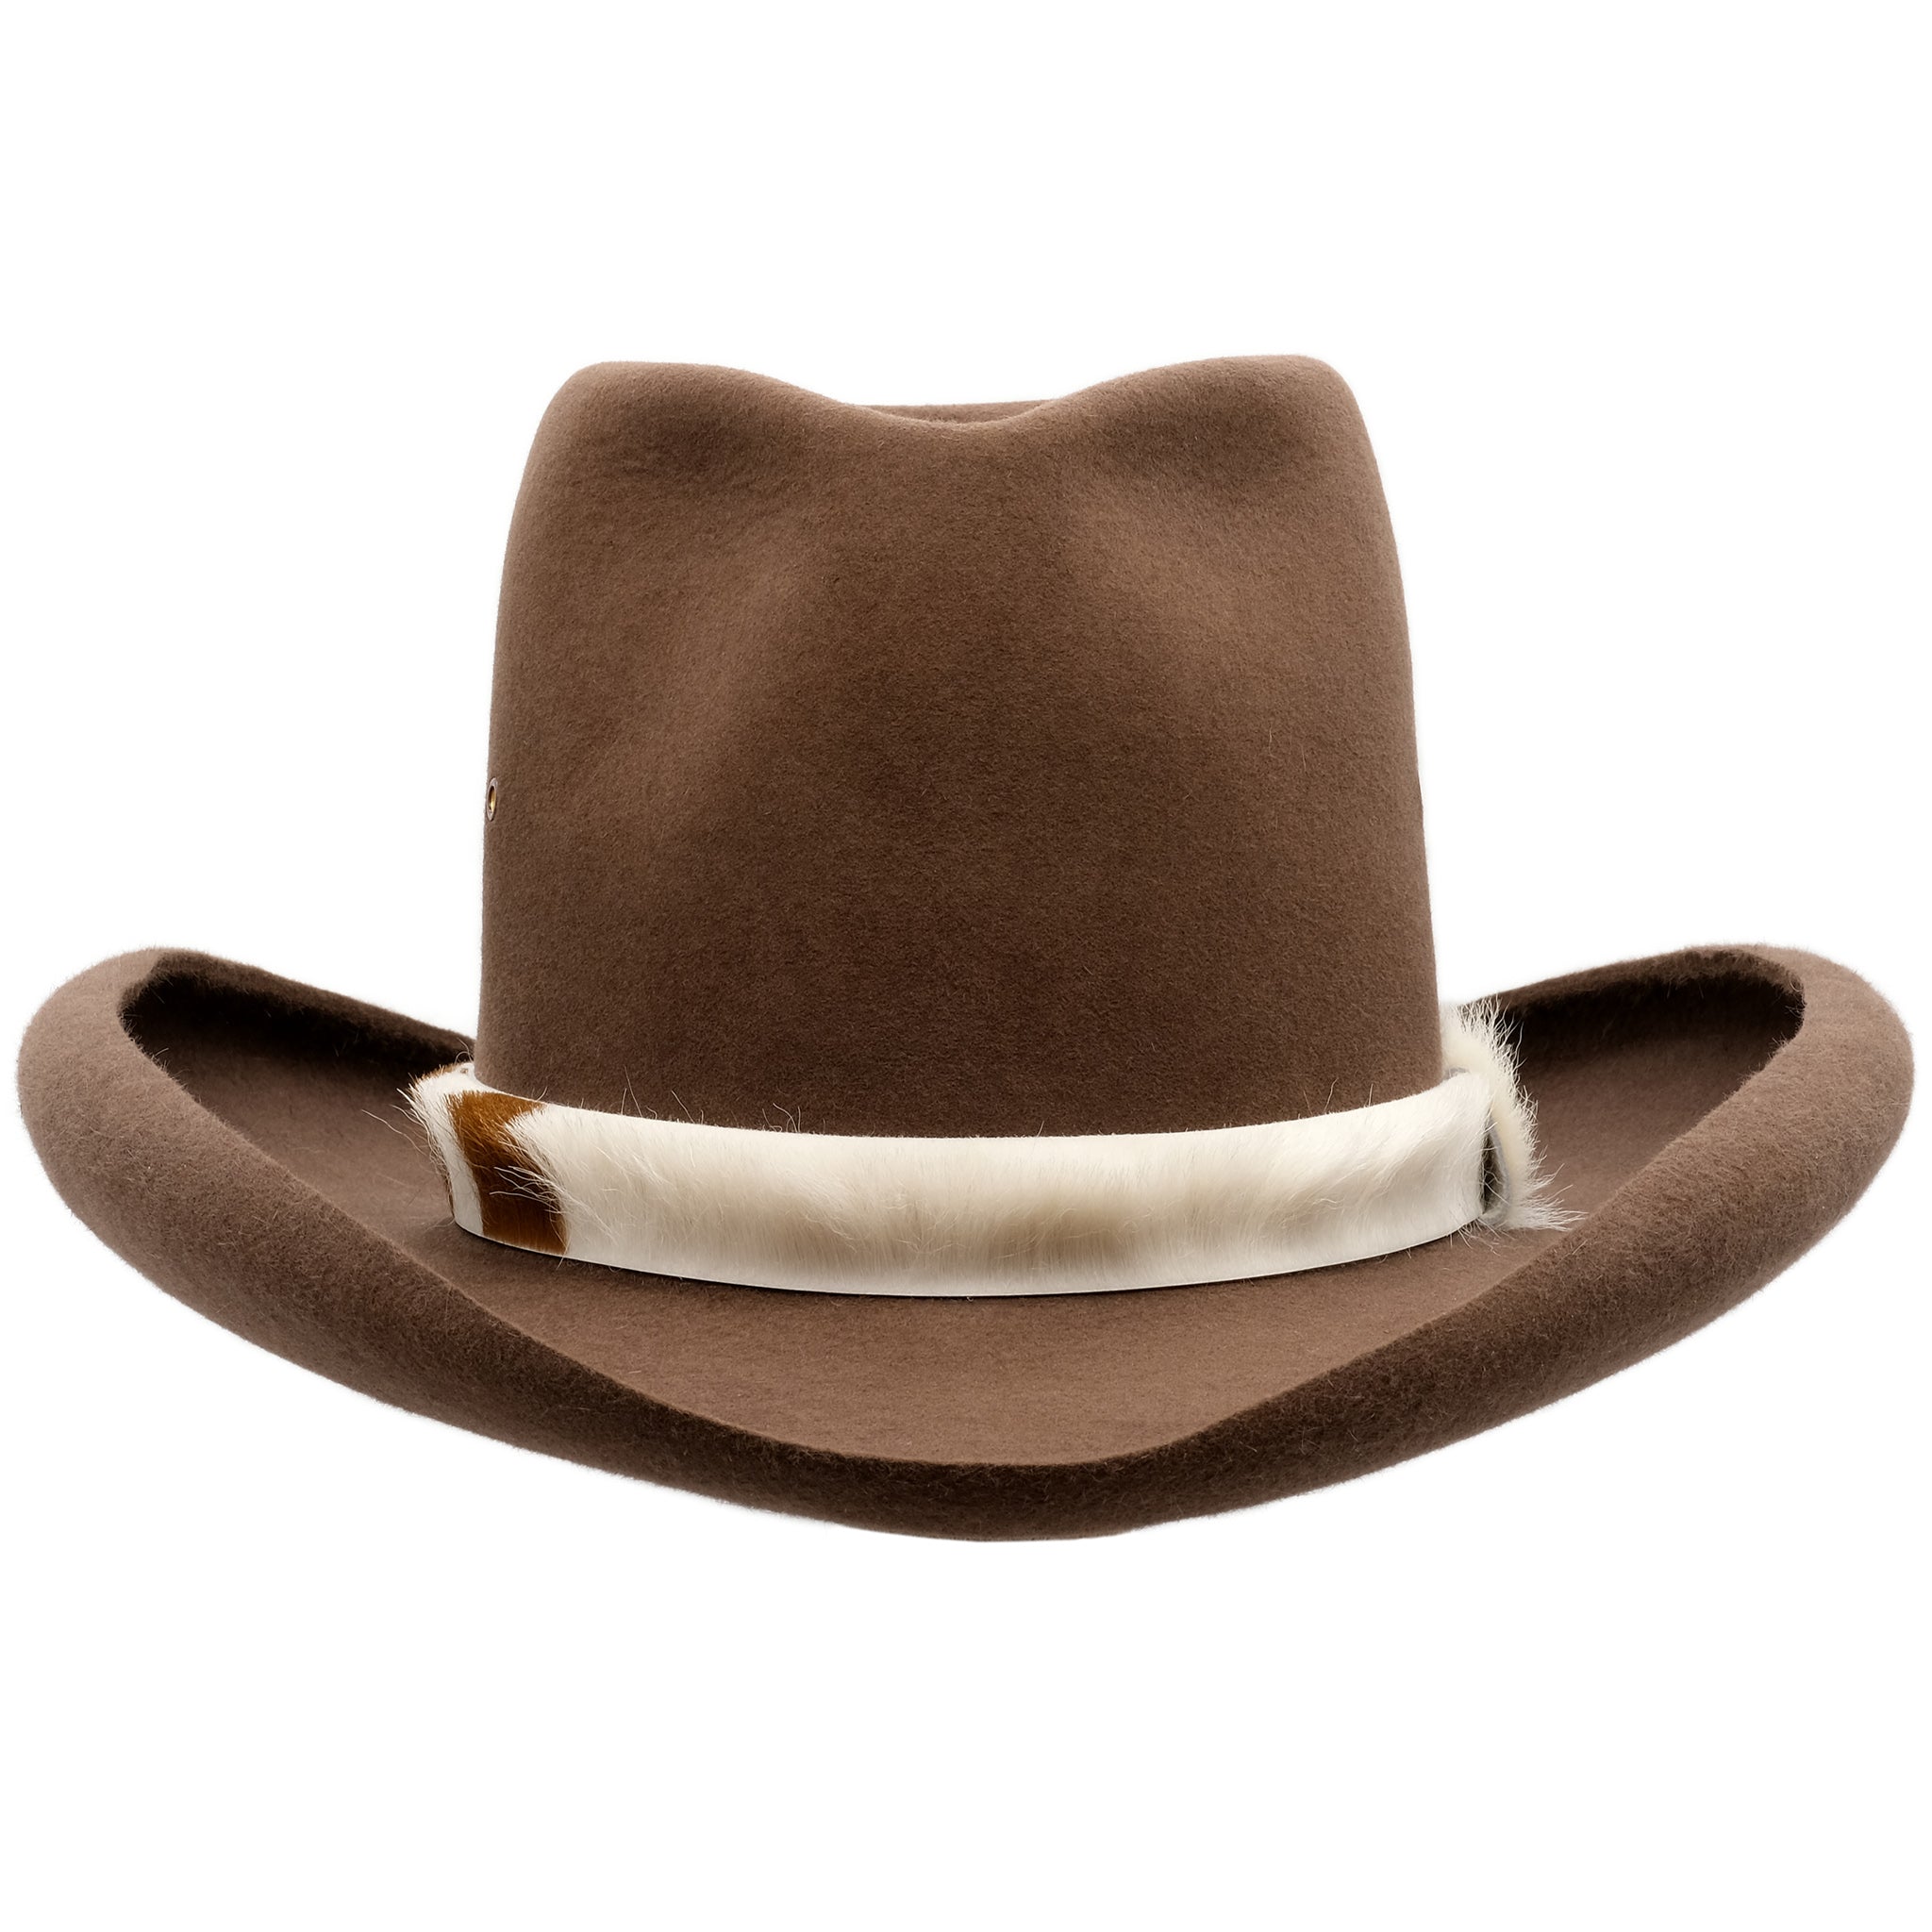 Front-on view of Akubra Sombrero in Fawn colour